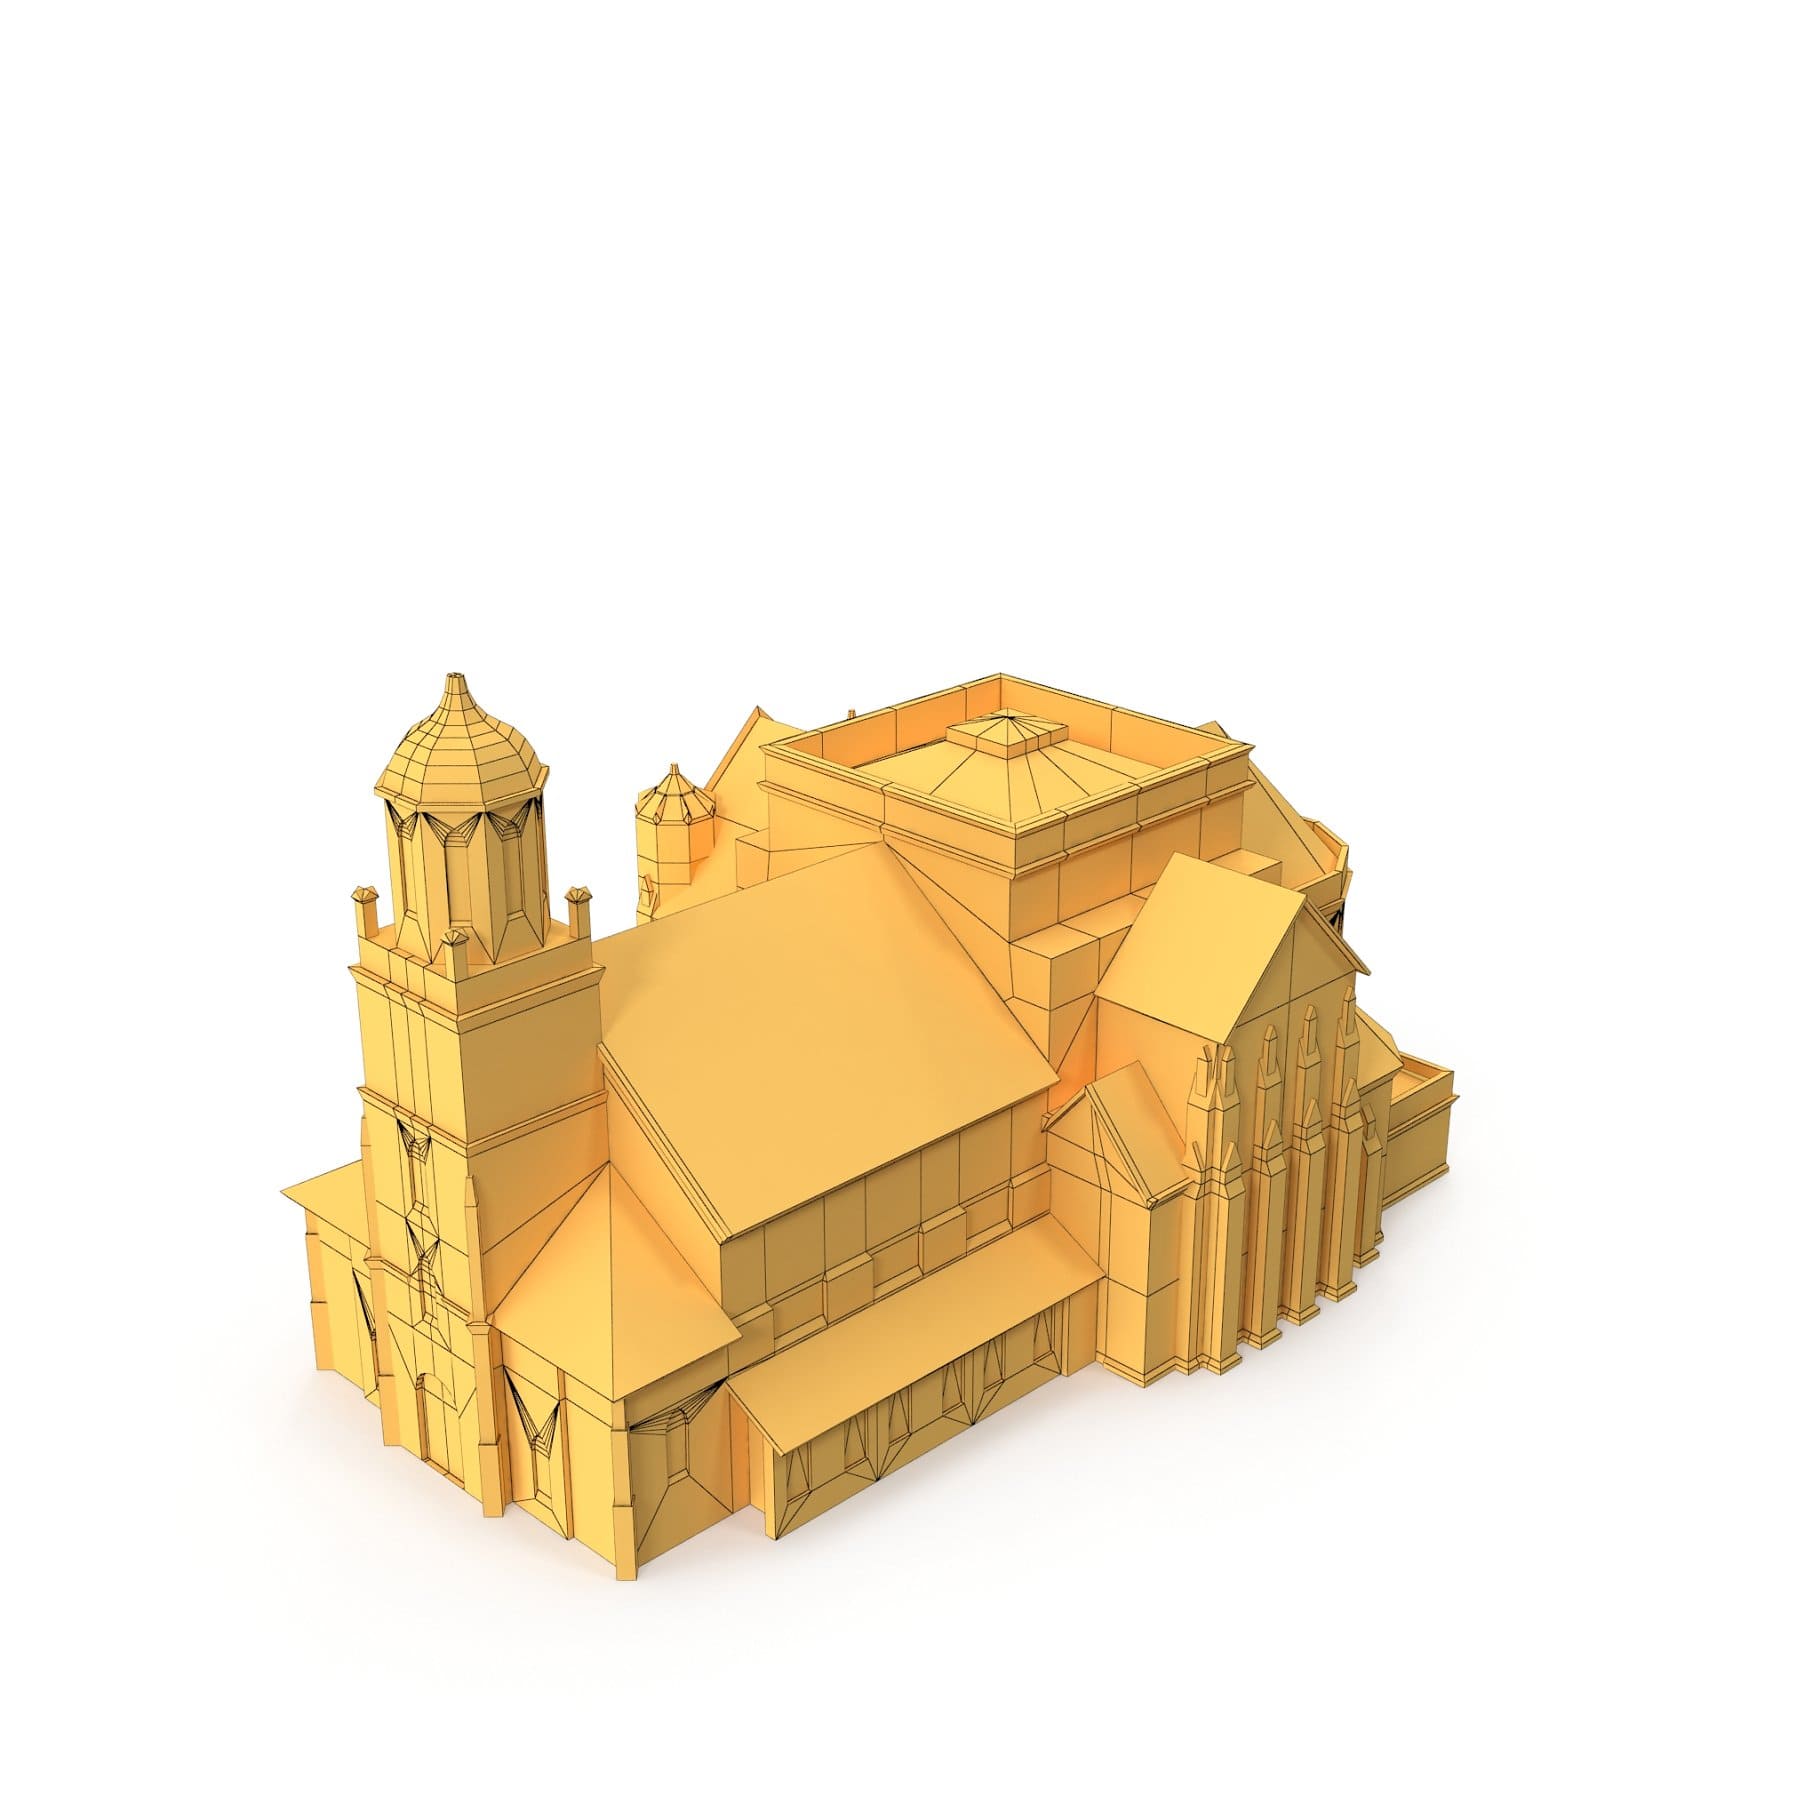 3D model of a church building with a tall tower.